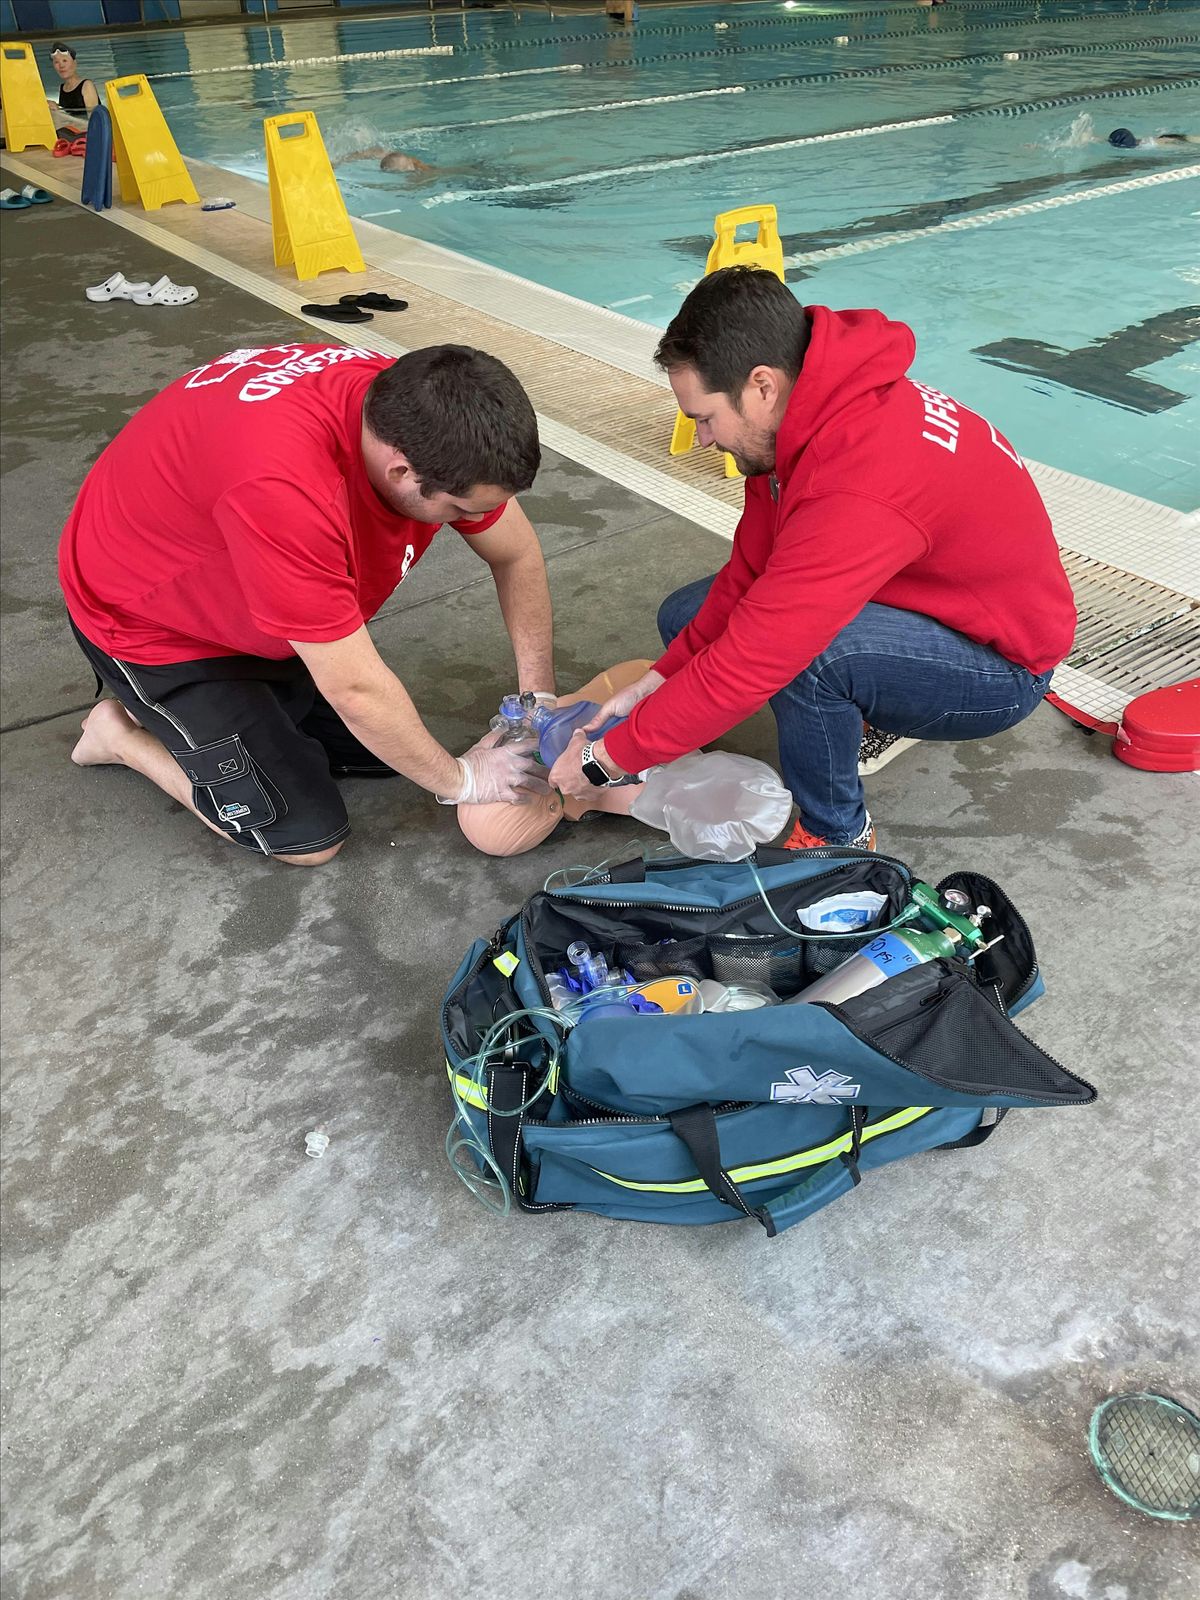 West LA Fun 3-Day Red Cross Lifeguard Training -Blended Learning